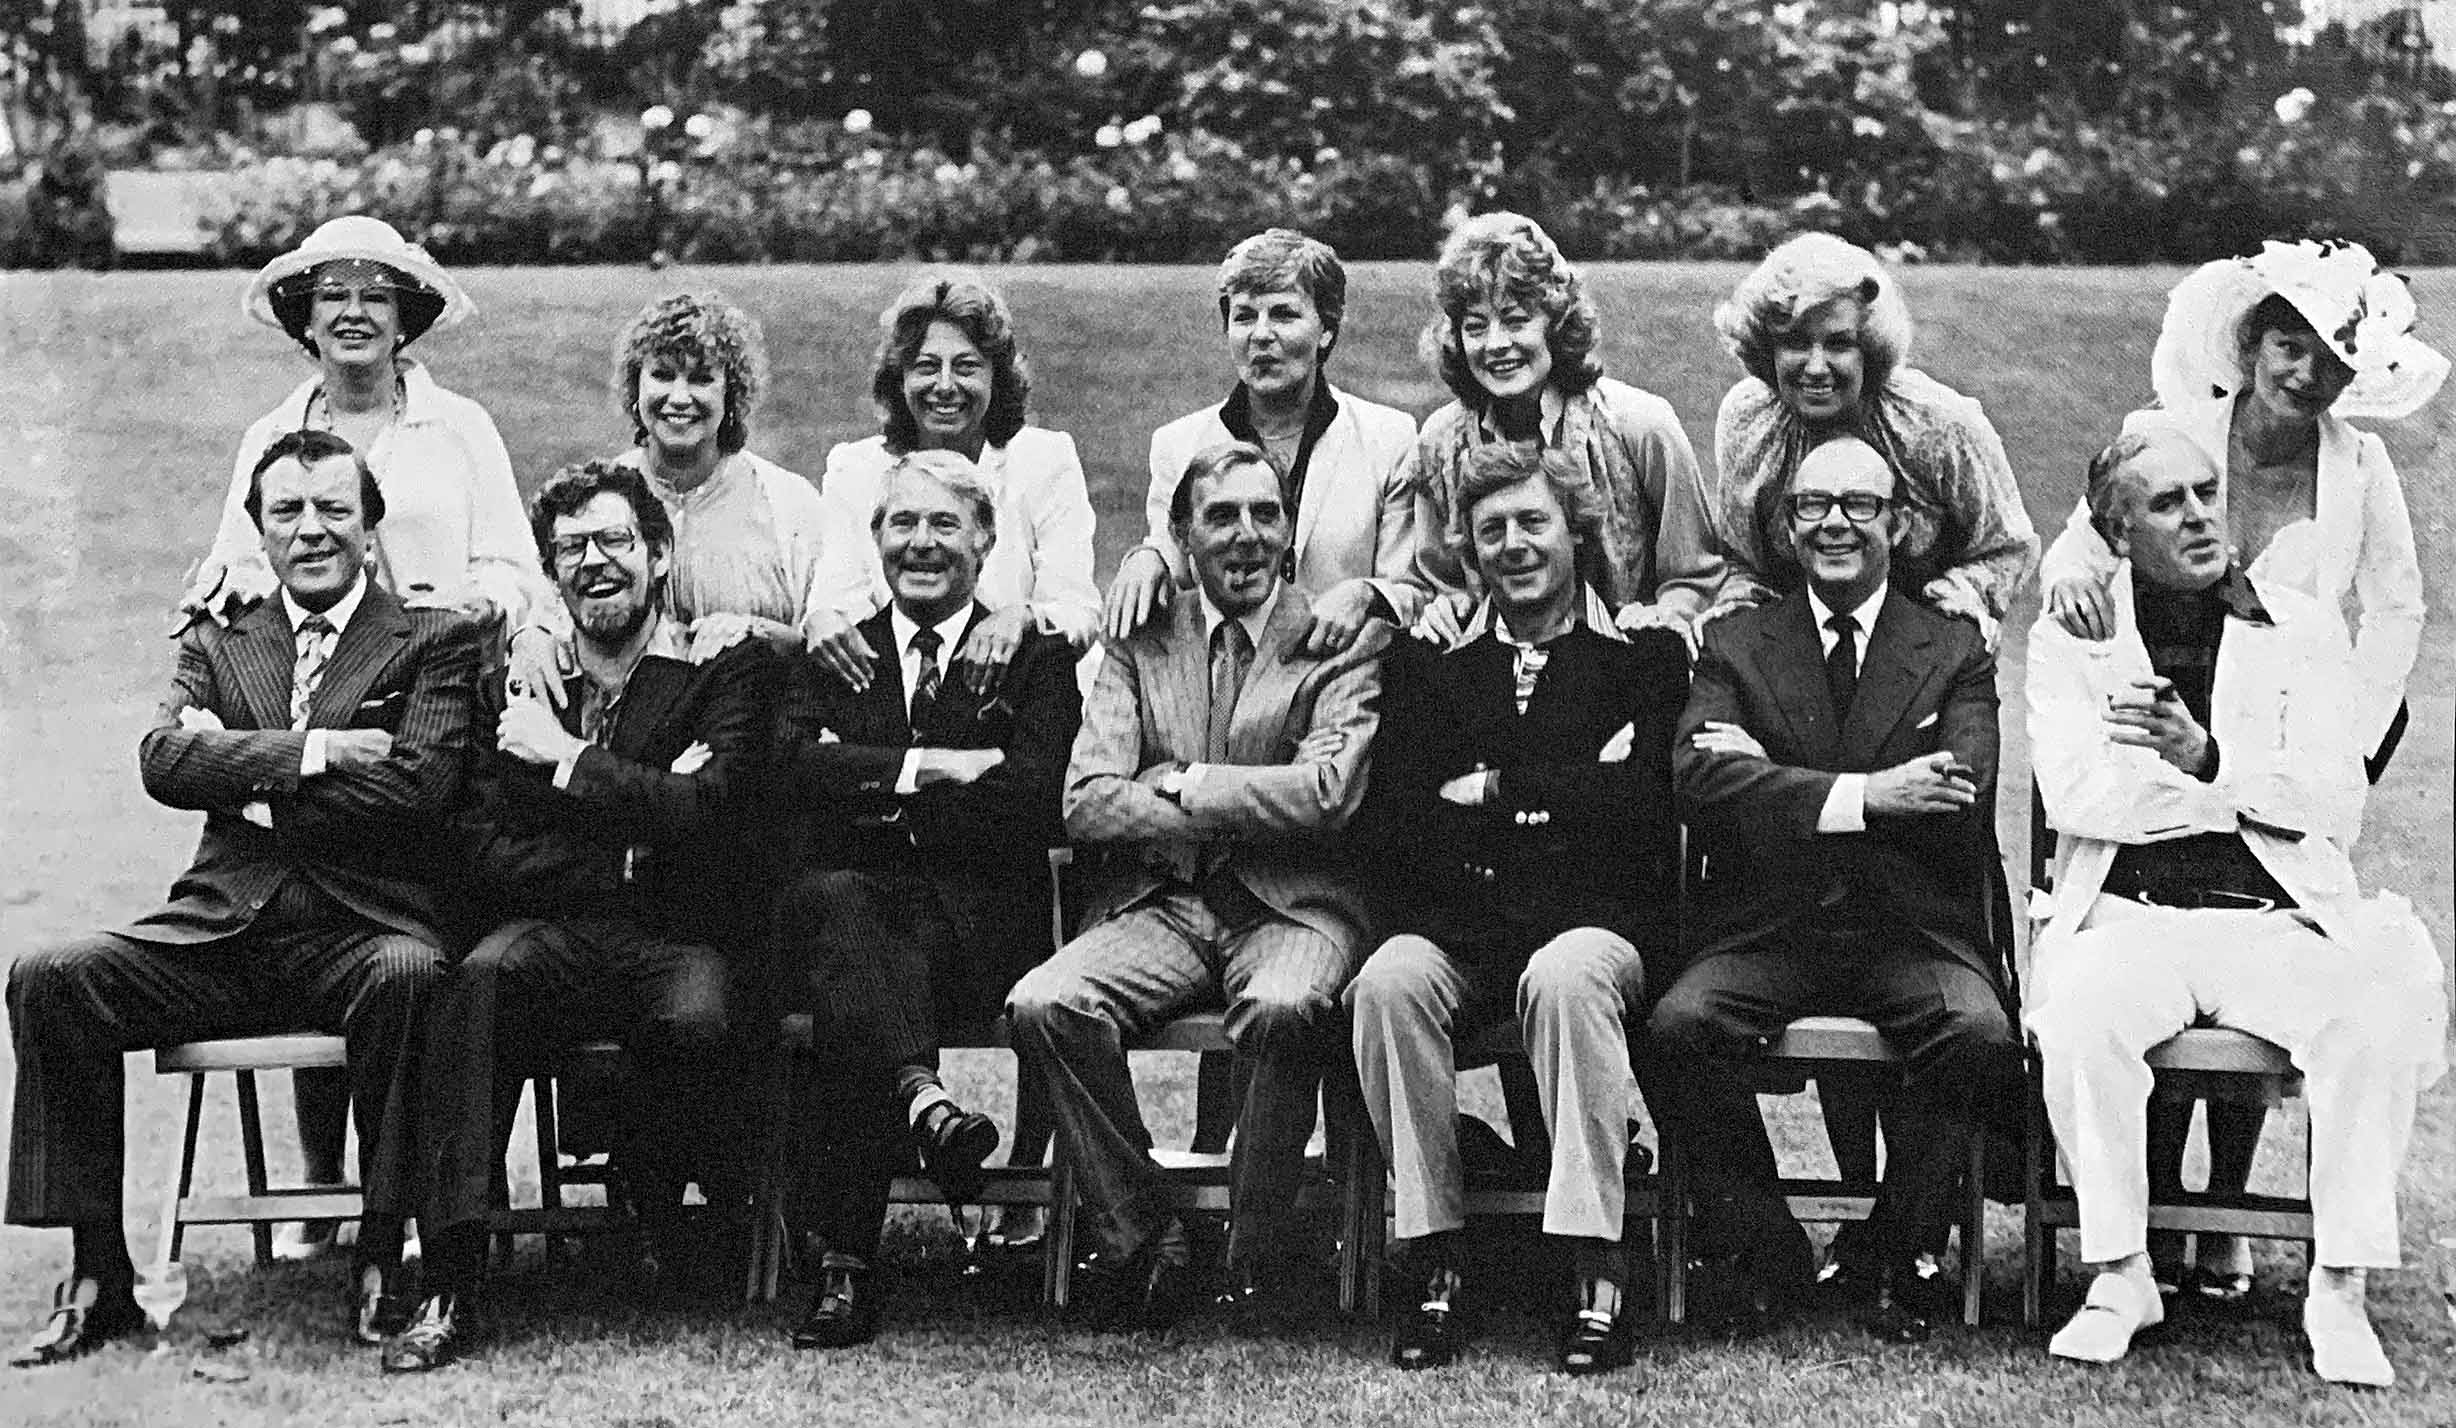 Eamonn Andrews, Rolf Harris, Ernie Wise, Eric Sykes, Michael Aspel, Eric Morecambe and George Cole with their wives